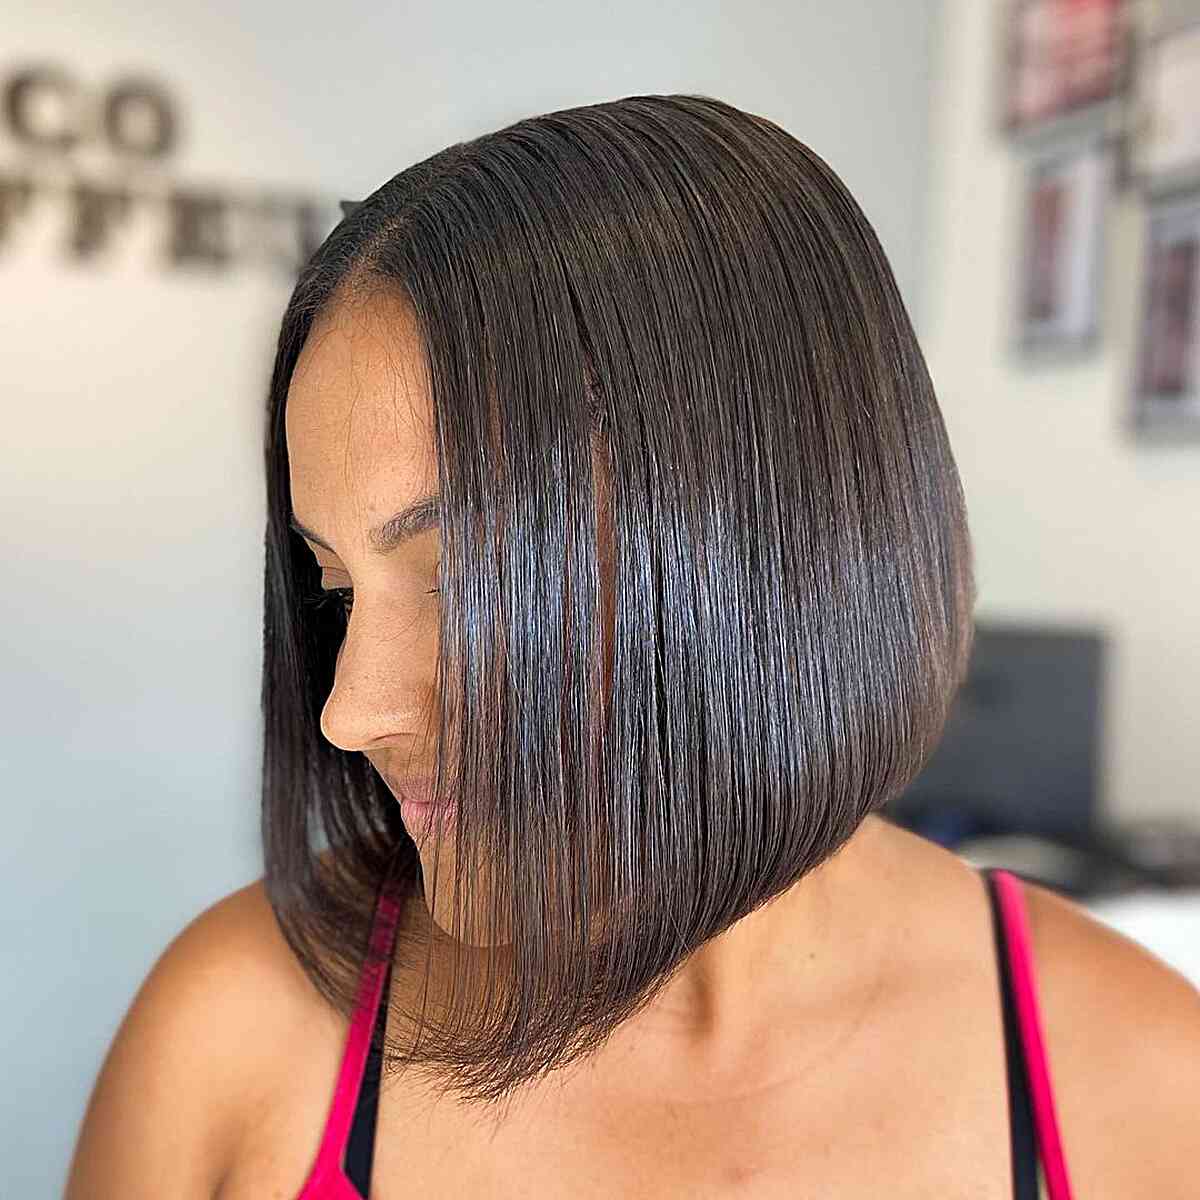 Middle Parted Neck-Length Blunt Cut Bob for Fine Hair